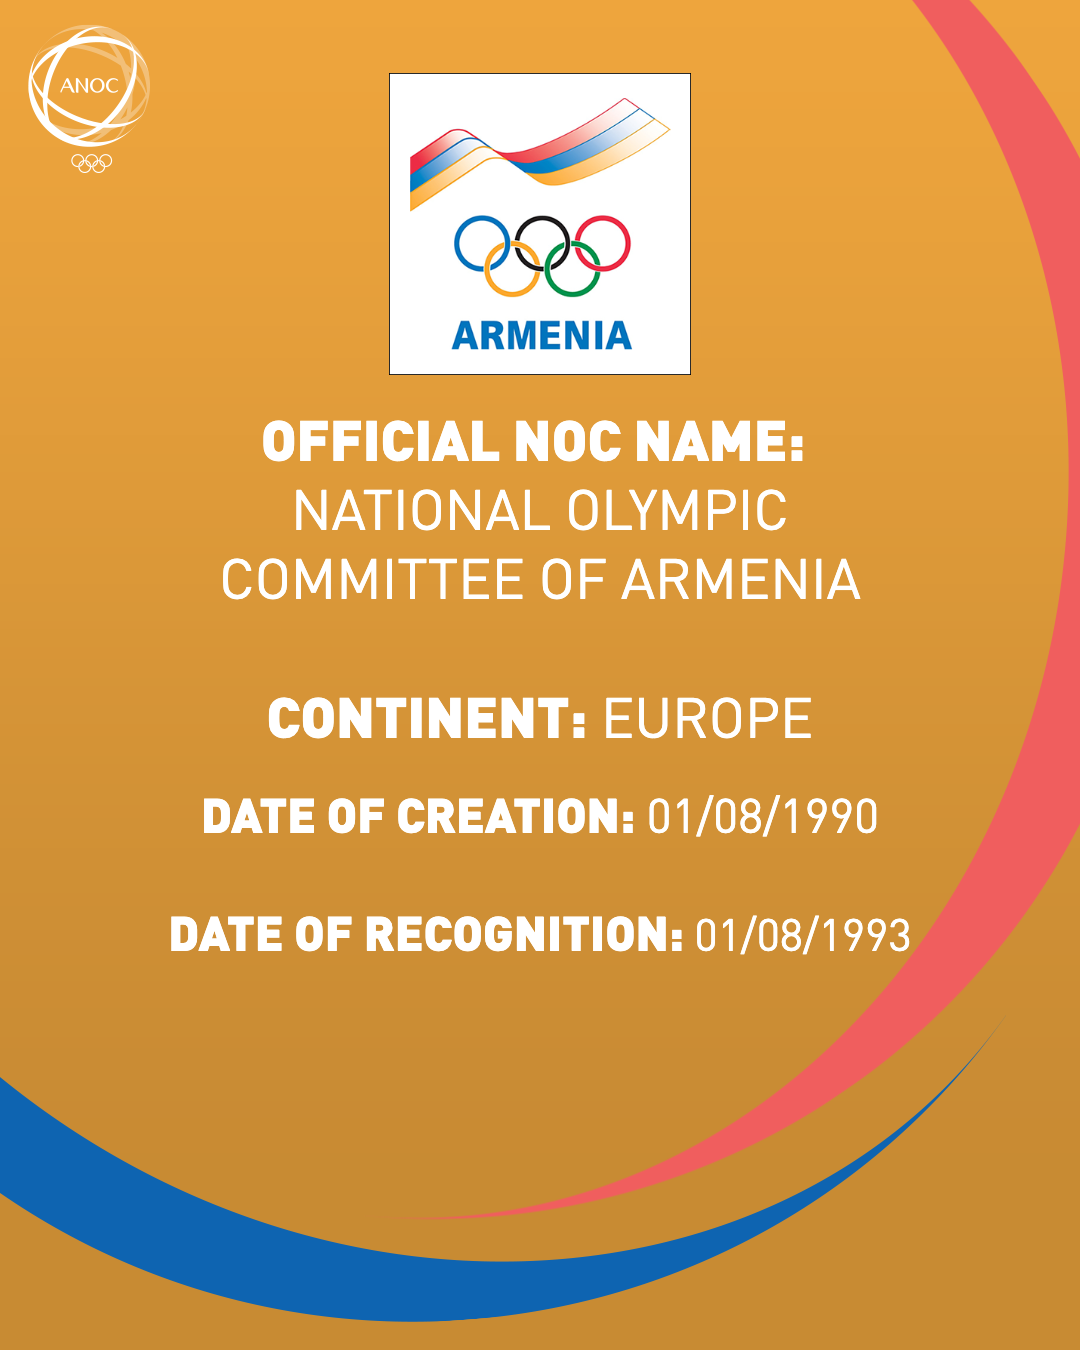 National Olympic Committee of Armenia